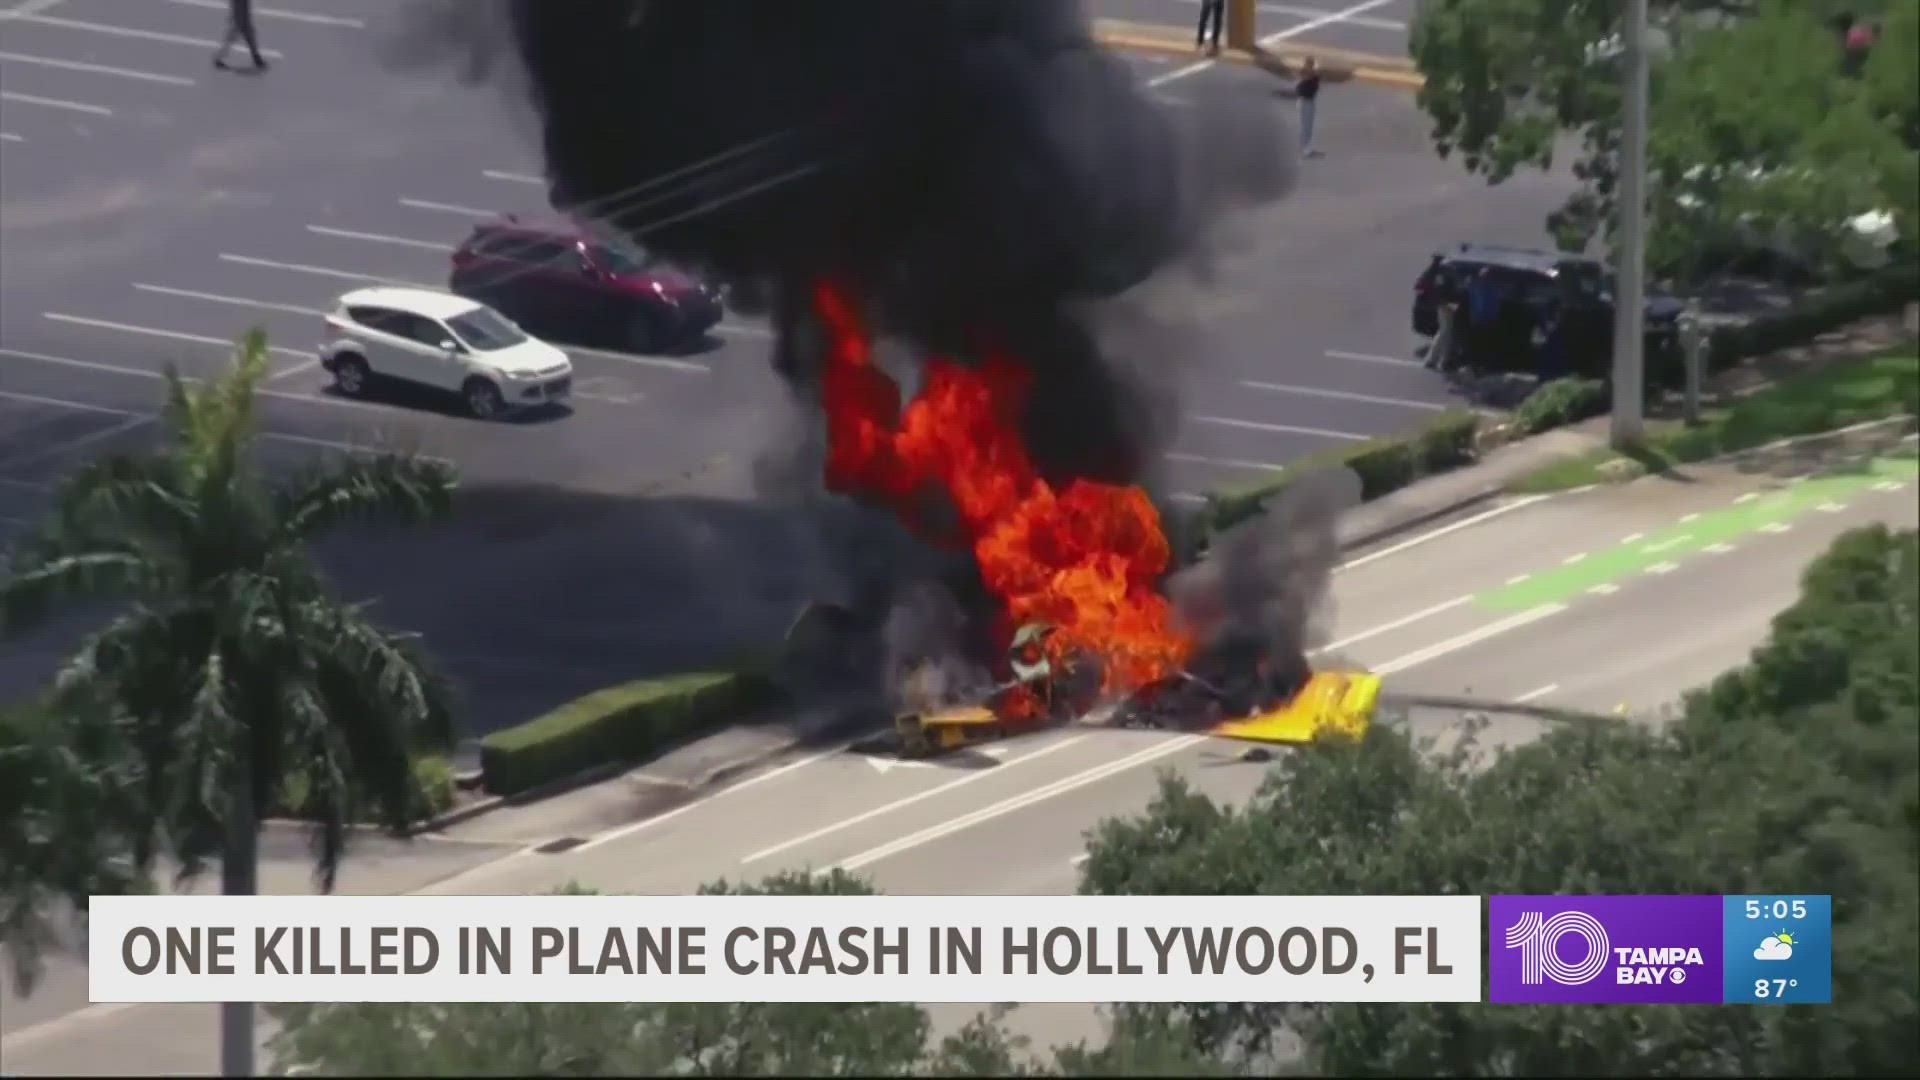 The plane was fully engulfed in flames when firefighters arrived.